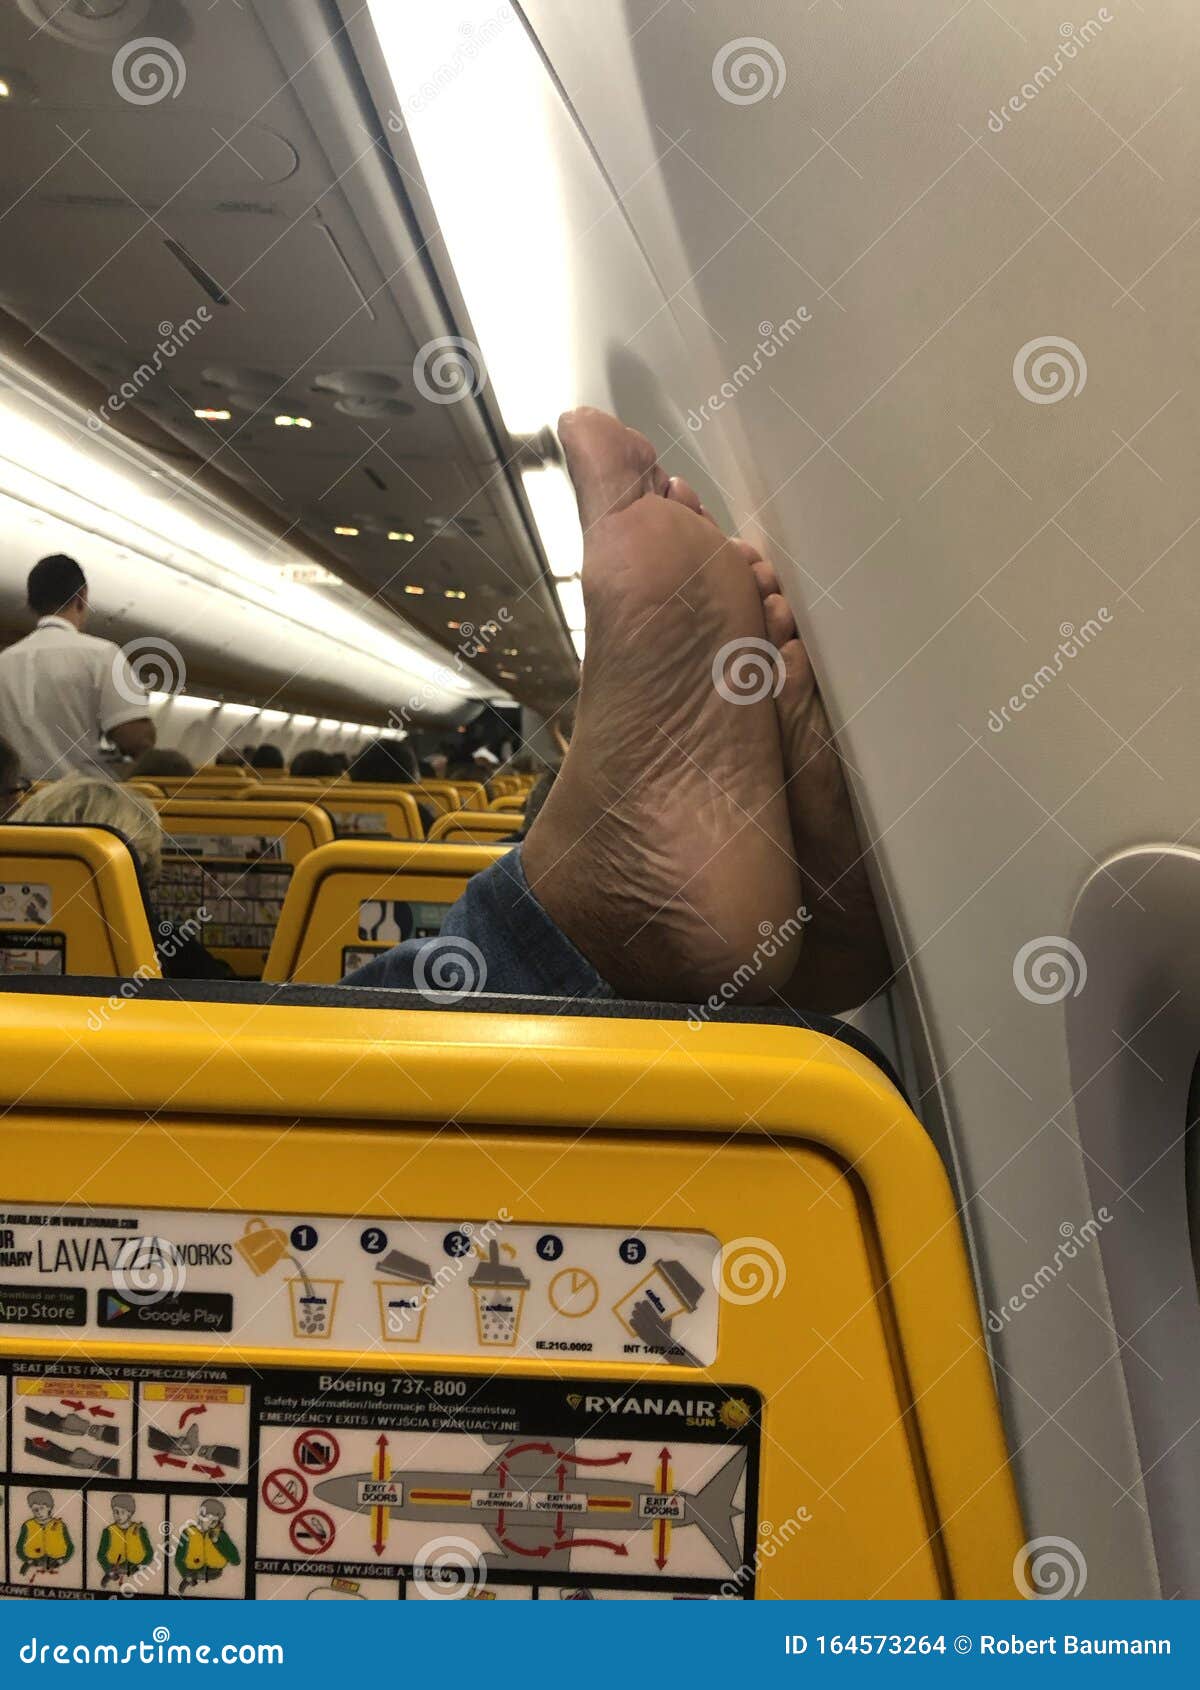 04/11/2019 - Ryanair Flight from Warsaw in Poland To Amman in - Passenger Resting His Feet the Wall Inside the Aeroplane Editorial Stock Image - Image of 164573264